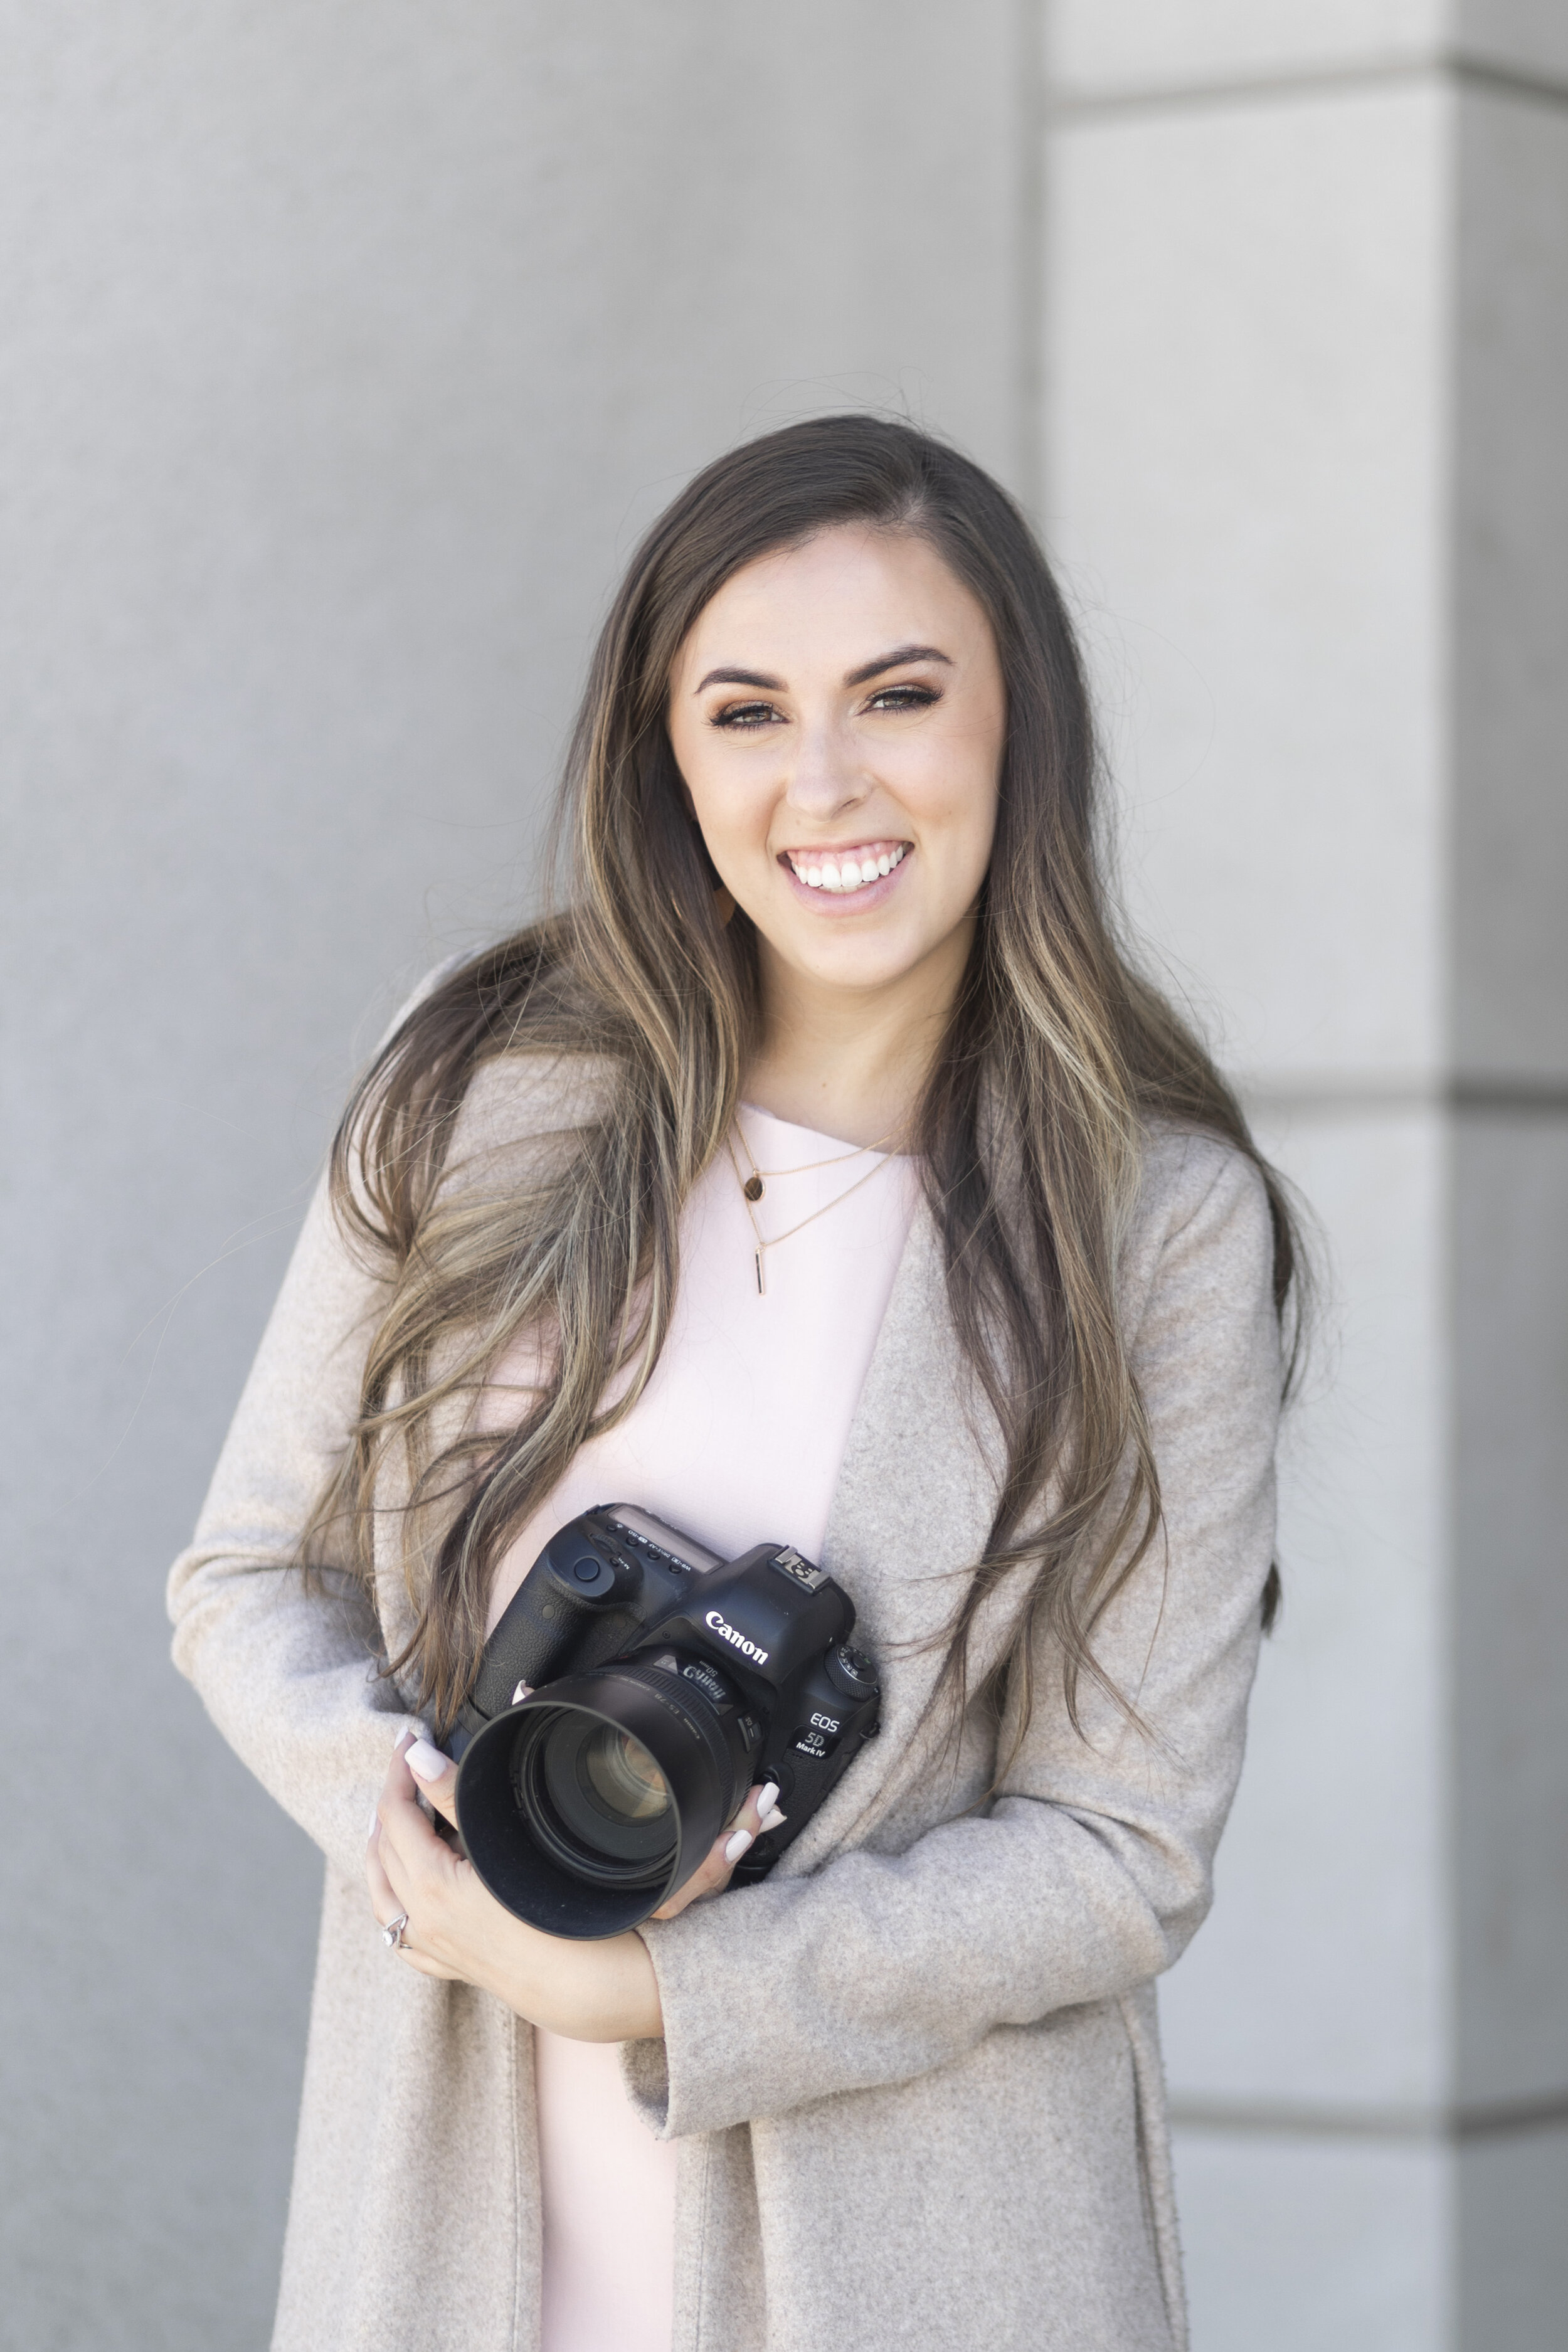  Posed with her Canon DSLR camera, professional photographer from Clarity Lane Photography poses for a brand photoshoot in Salt Lake, City, Utah. dslr camera, canon camera, khaki jacket, long balayage loose curled hair, brand photoshoot, professional